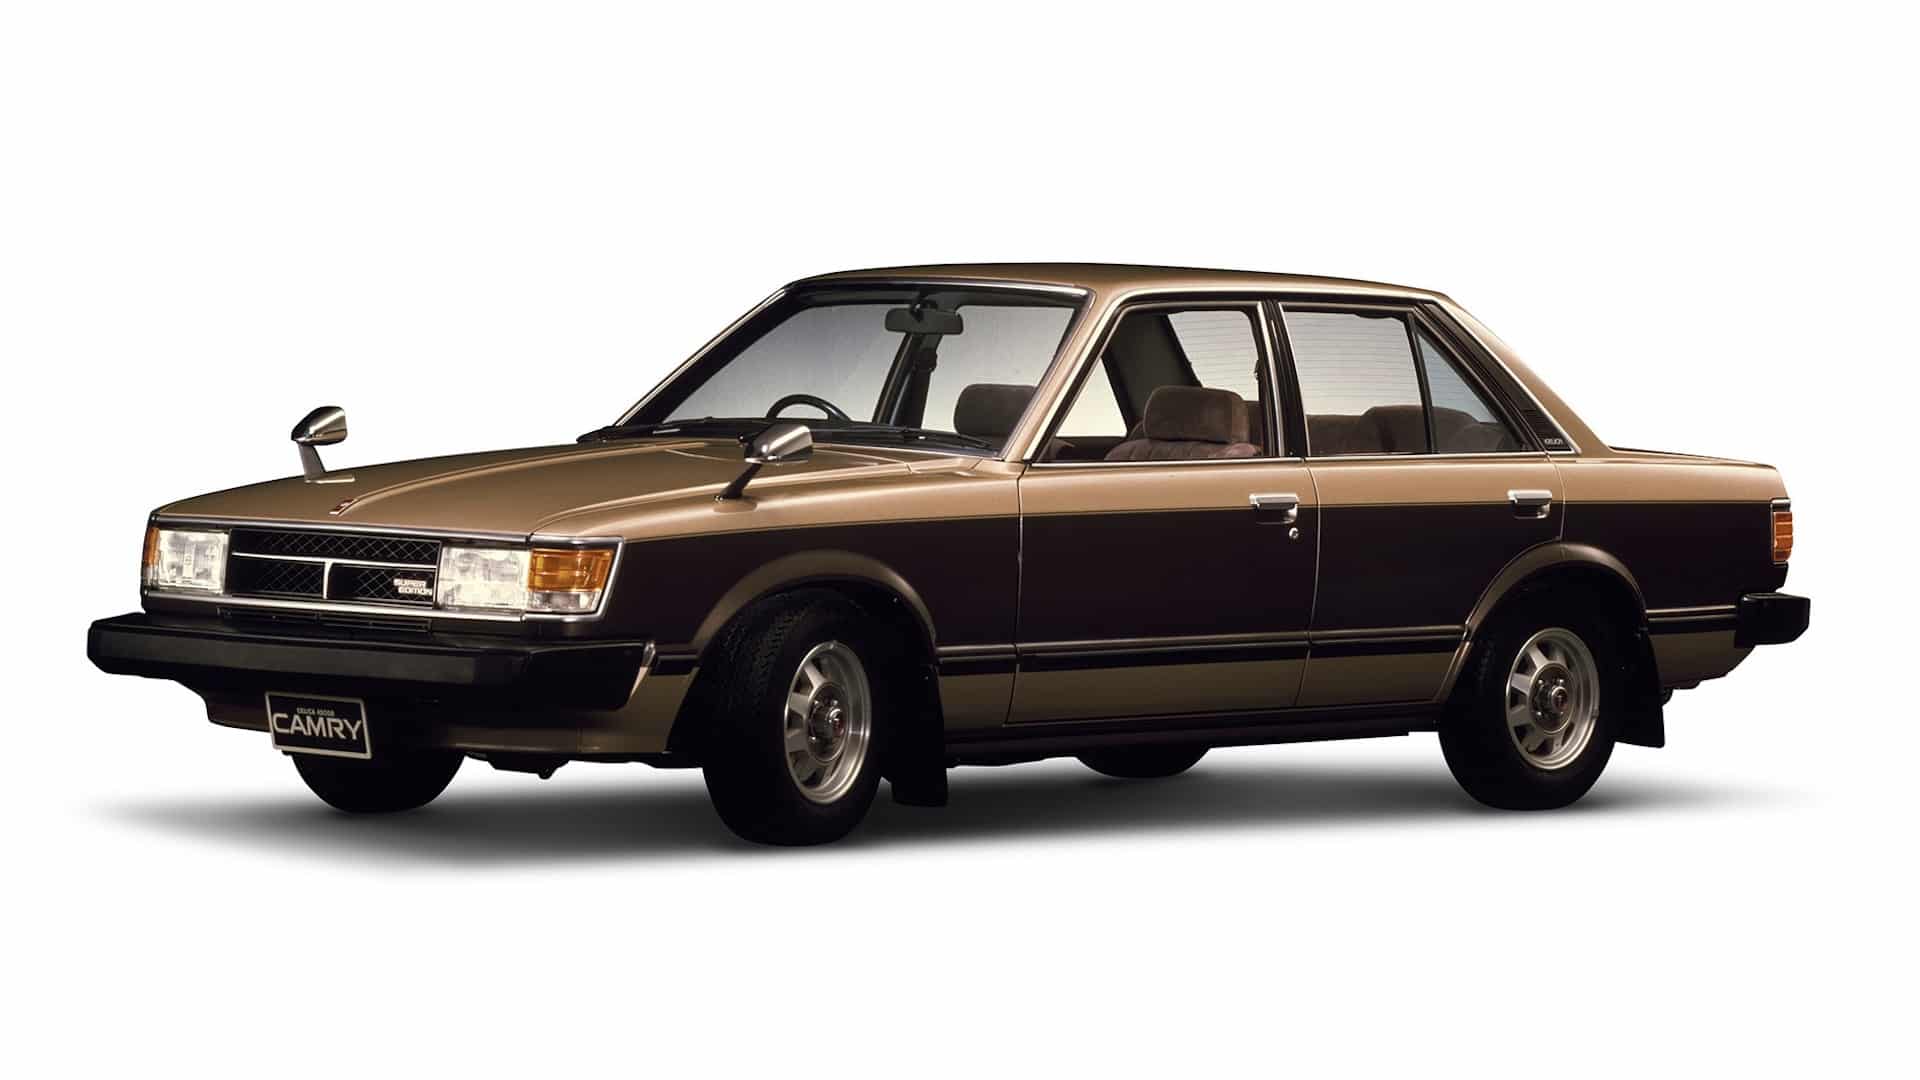 First generation of the 1980 Toyota Camry